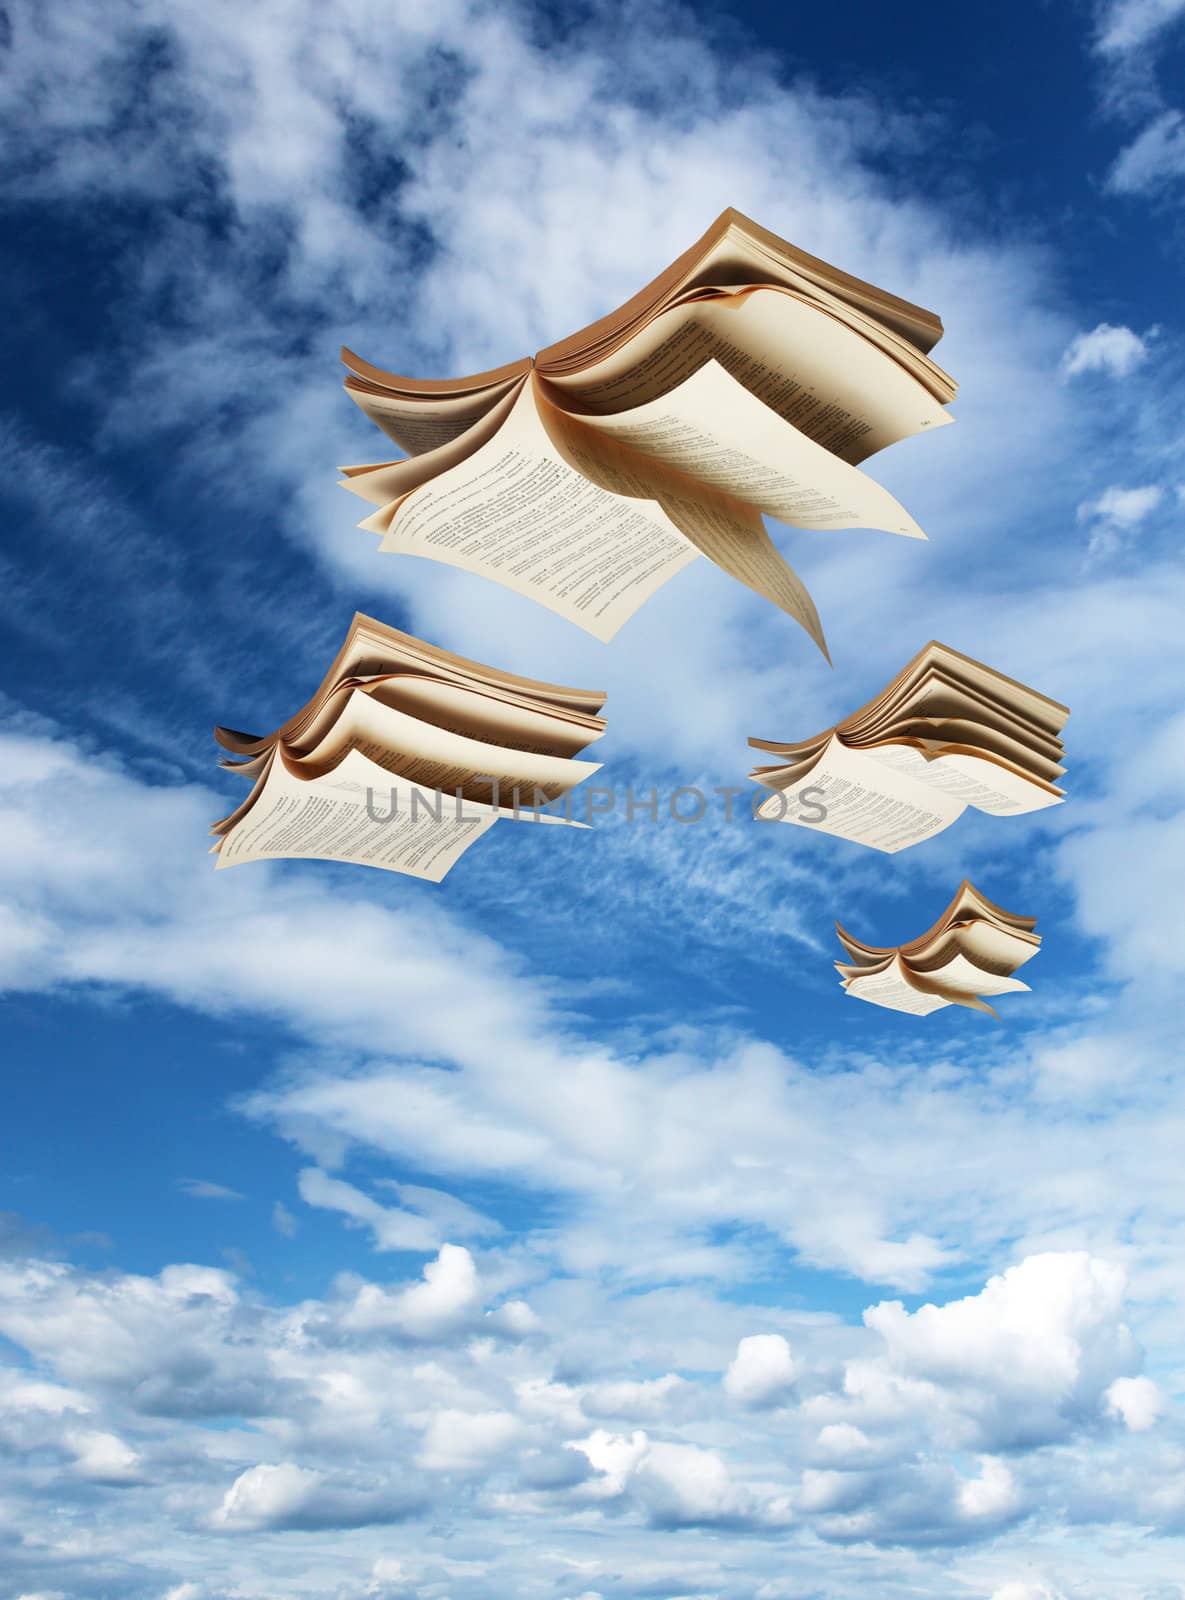 Four open books flying above by anterovium